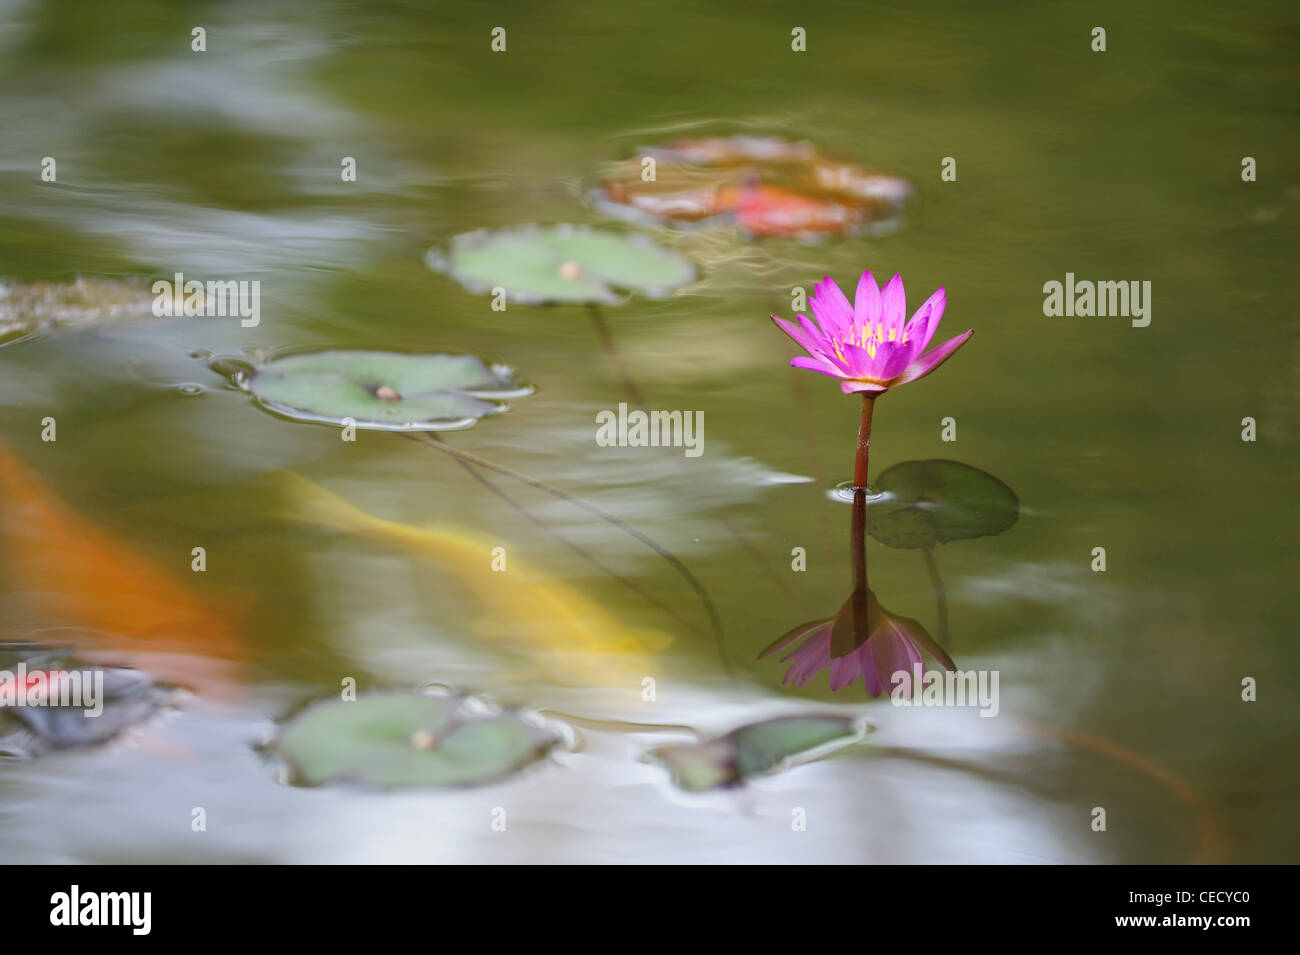 Single water lily flower blooming in the pond Stock Photo